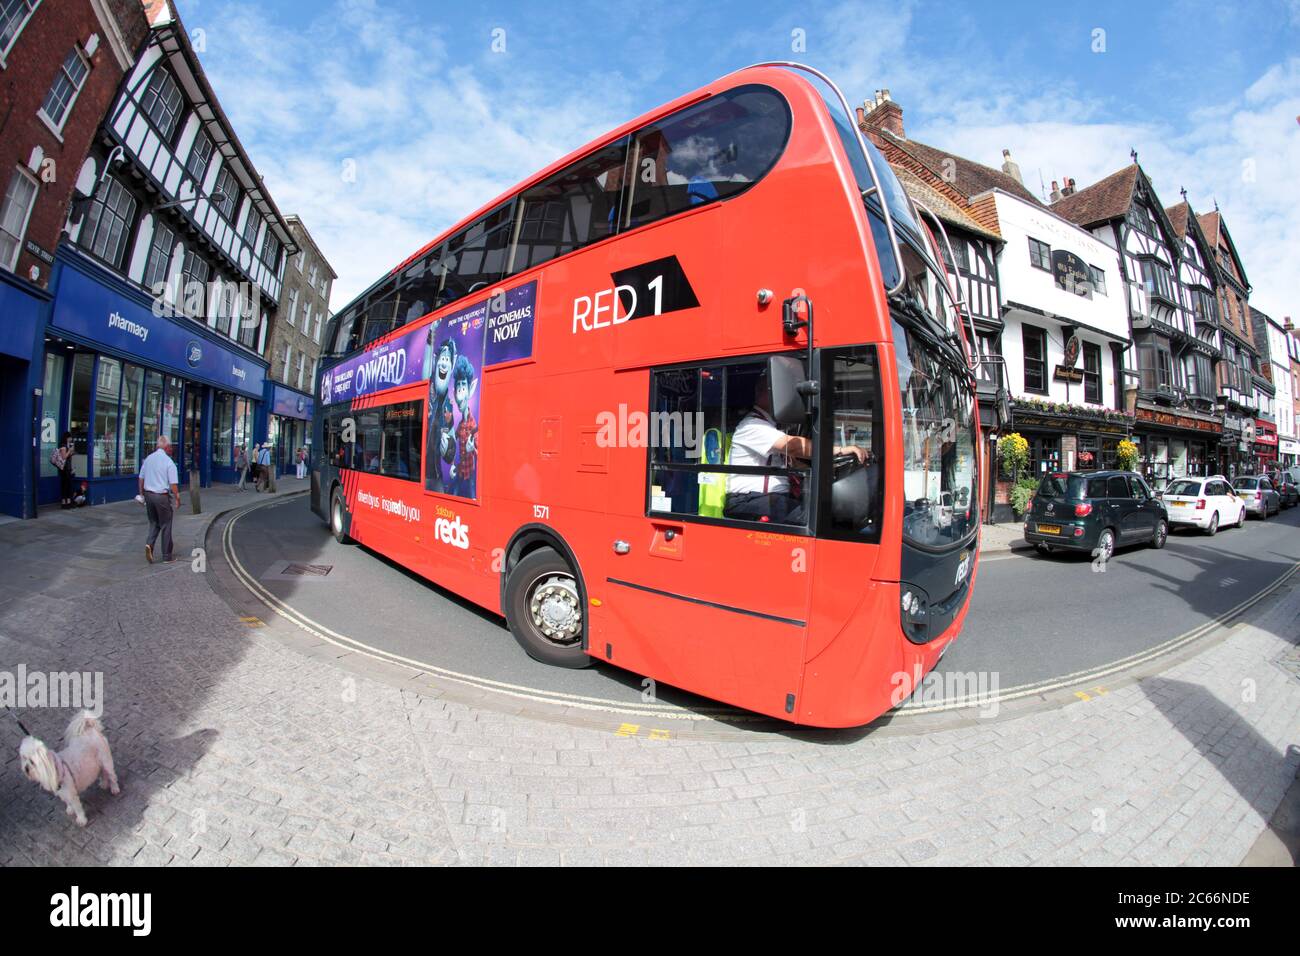 A large red double decker bus navigates the narrow streets of Salisbury, Wiltshire UK. July 2020. Stock Photo